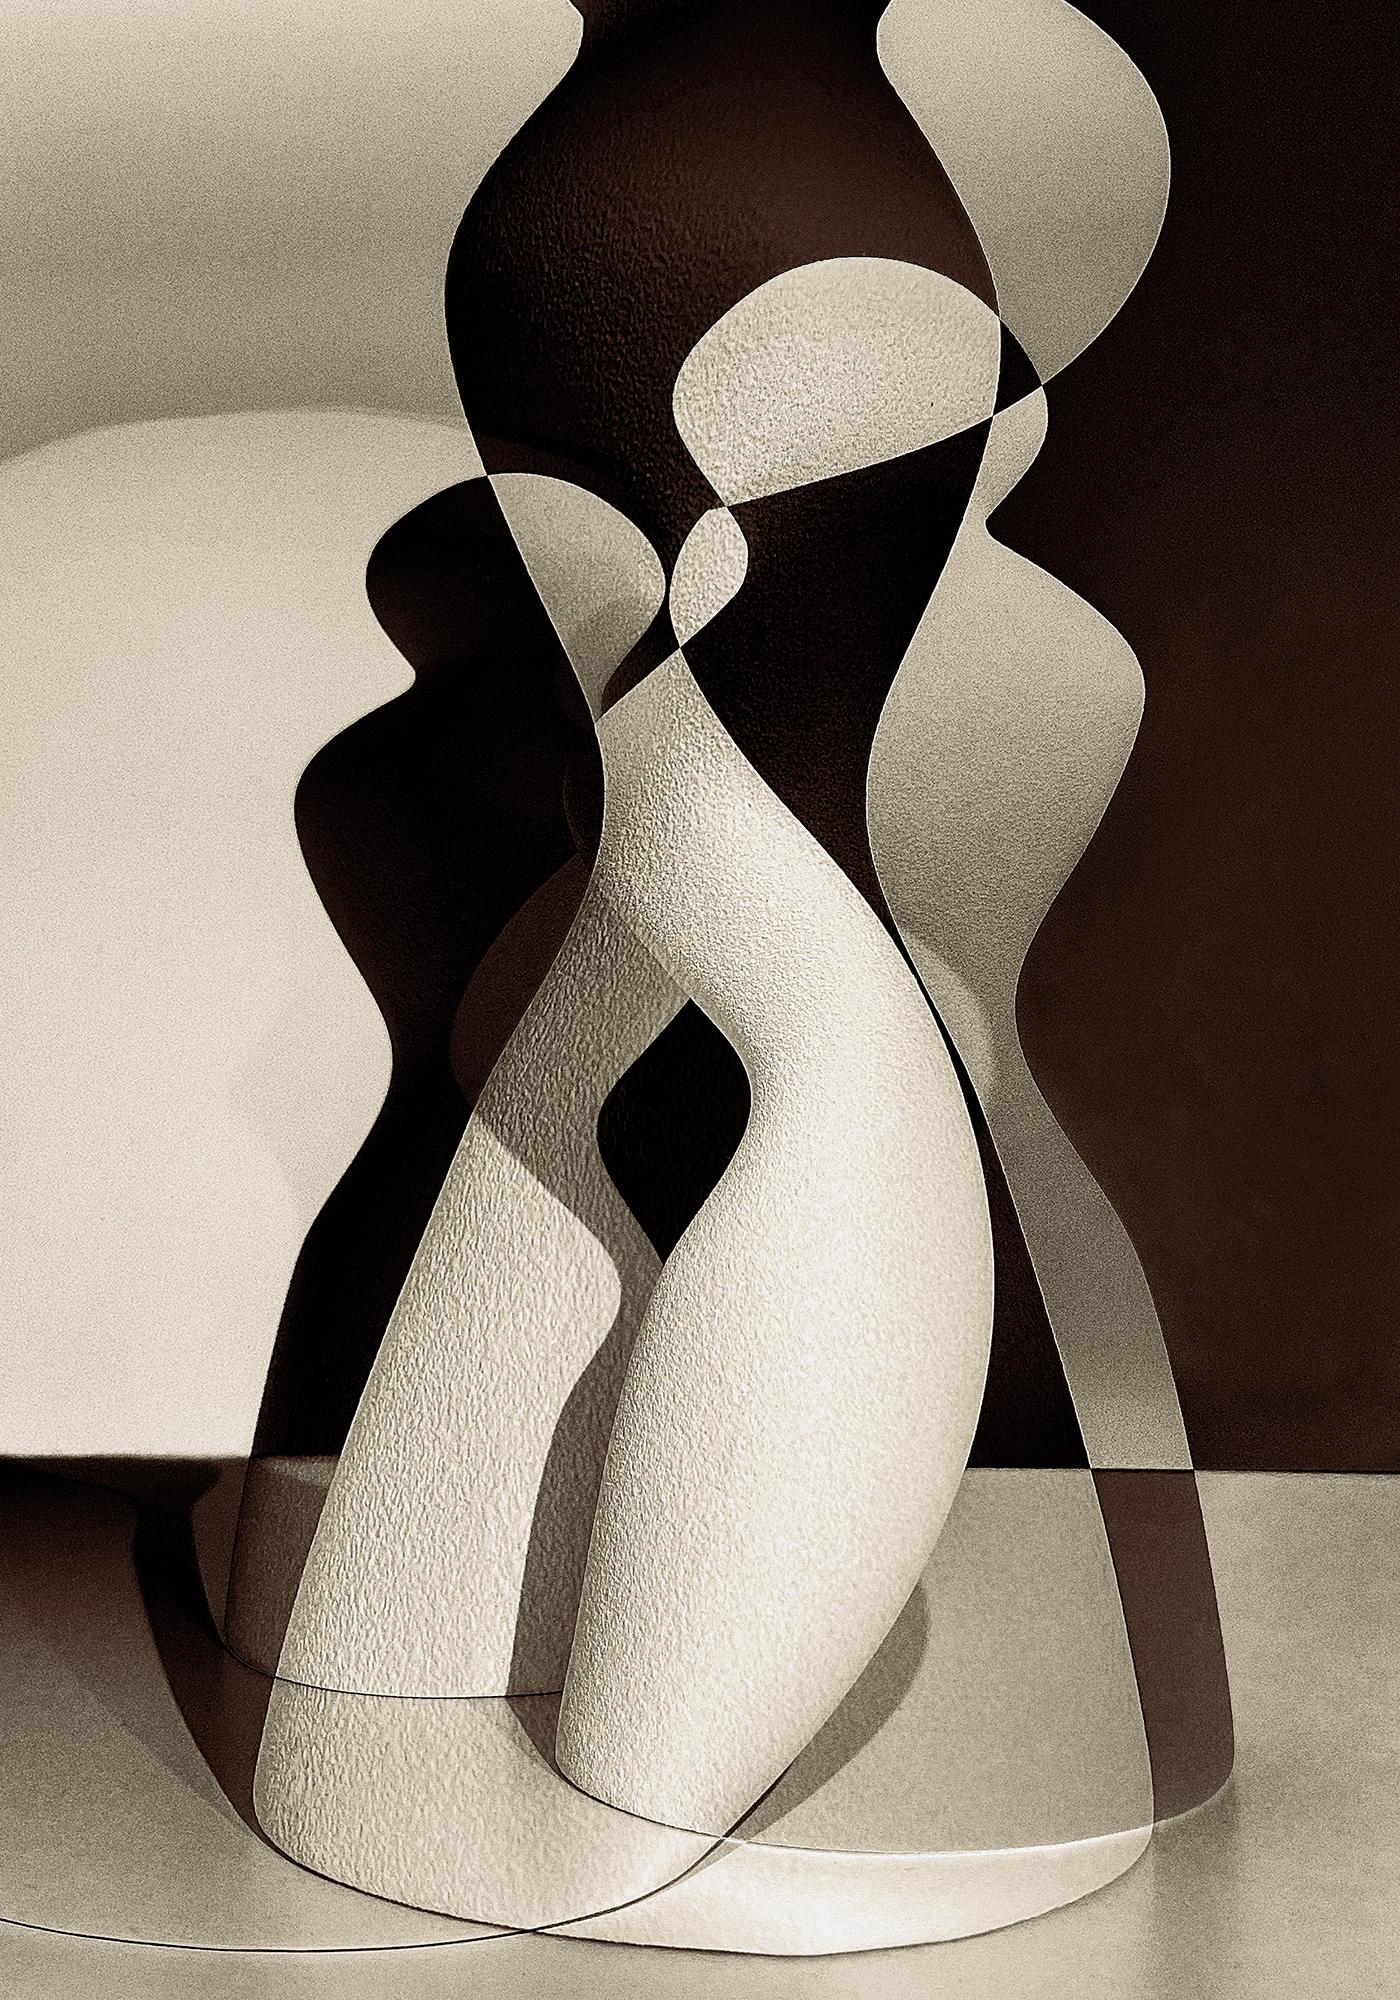 Sander Vos Figurative Print - In Between the shadows, Cubist sculpture, female figure abstract prints